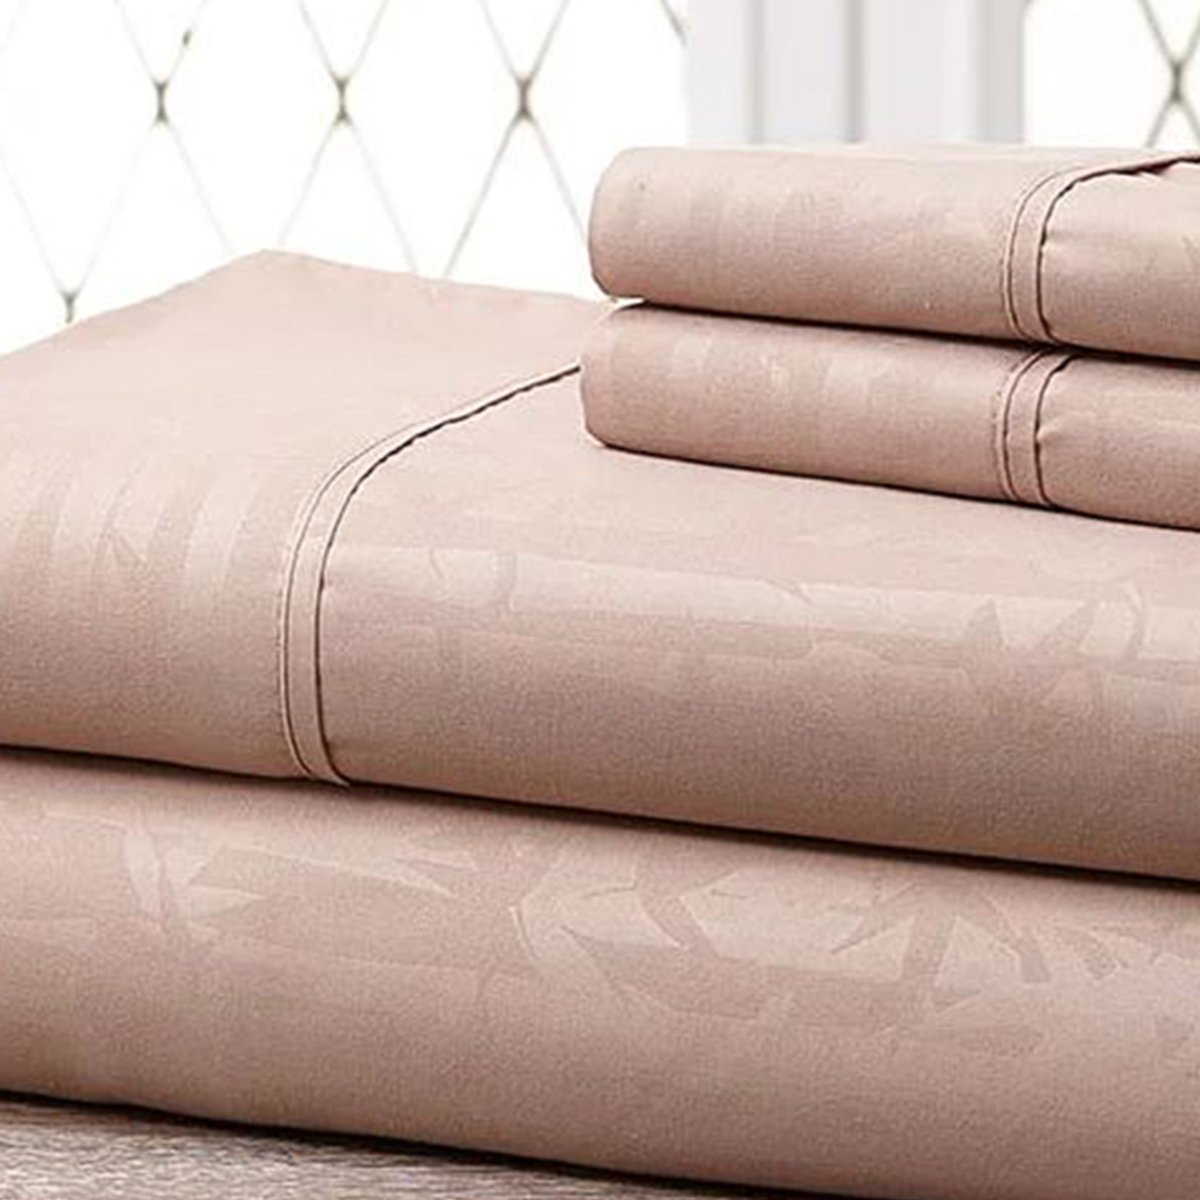 Super-soft 1600 Series Bamboo Embossed Bed Sheet, Taupe - King, 4 Piece